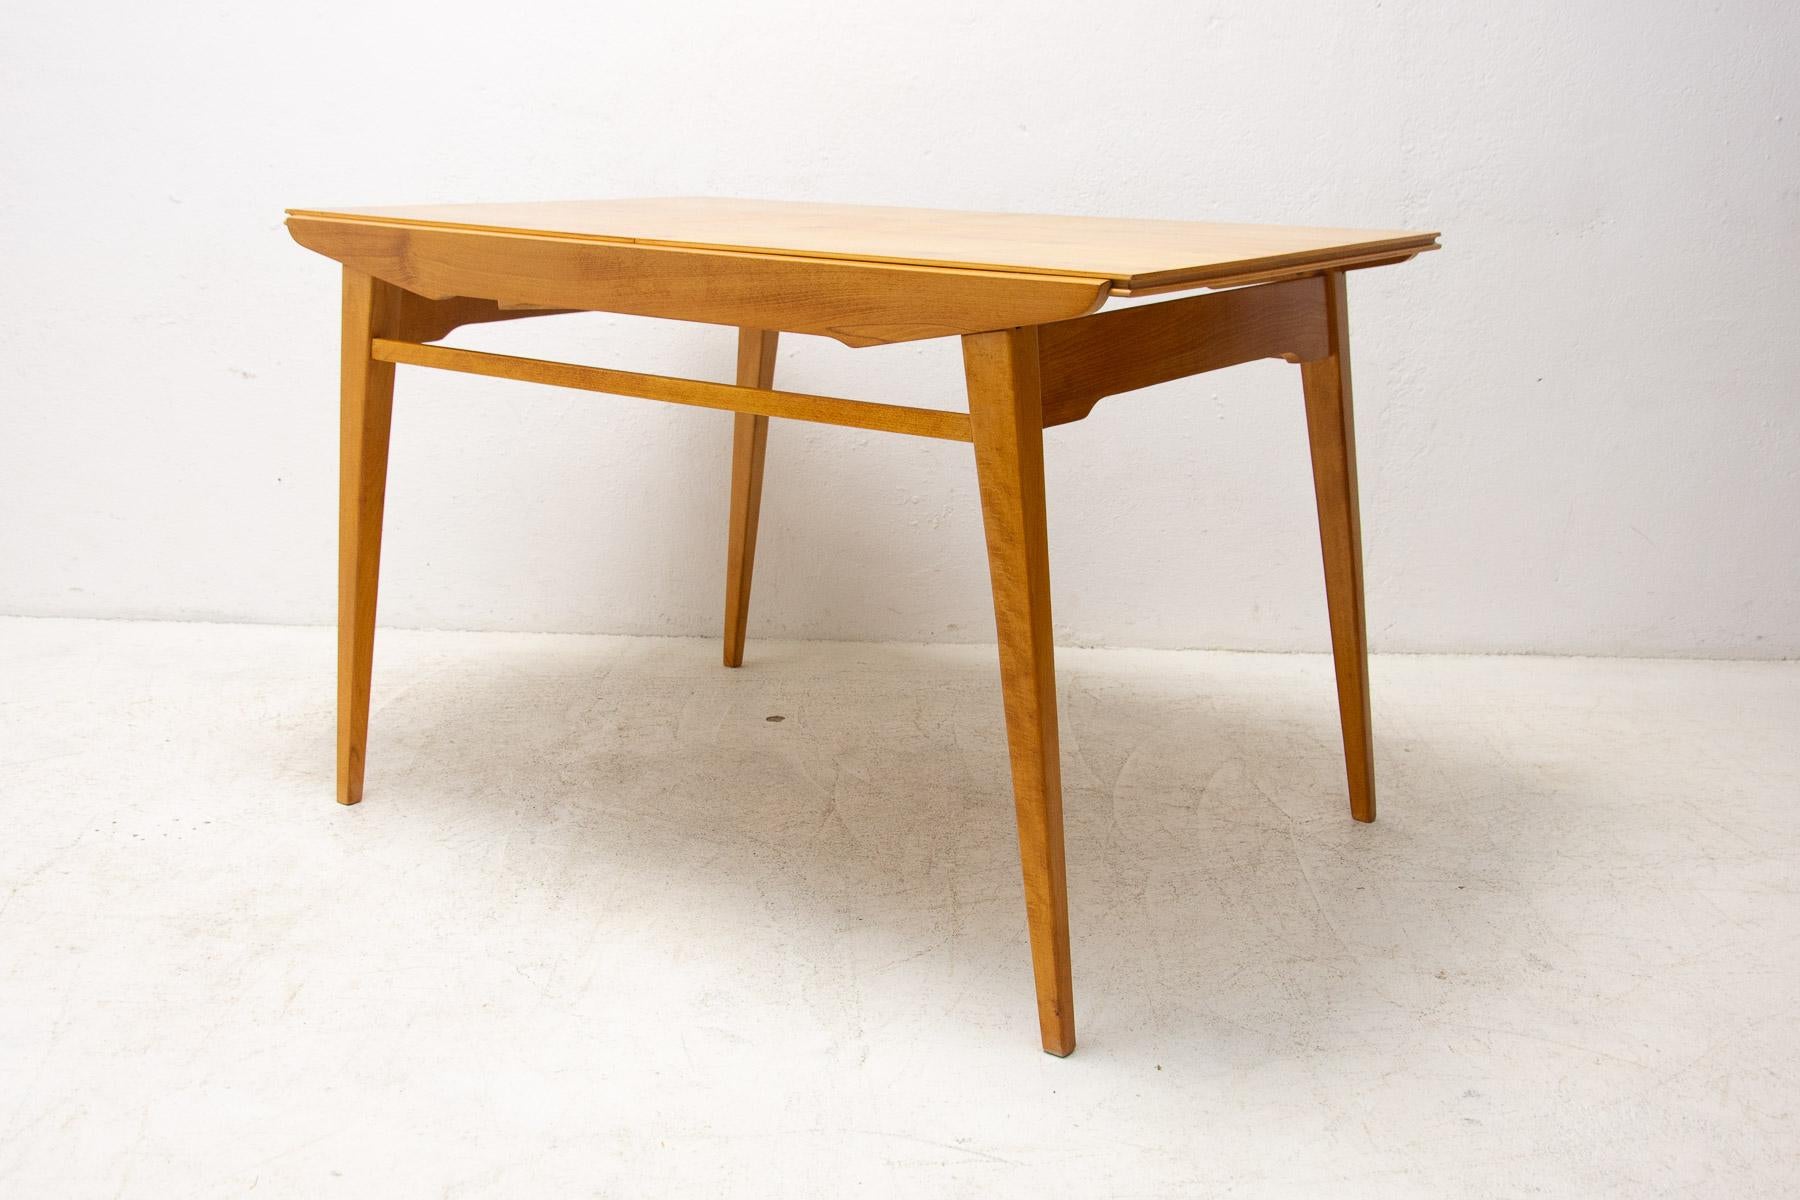 Midcentury Folding Dining Table by Bohumil Landsman for Jitona, 1970s For Sale 1